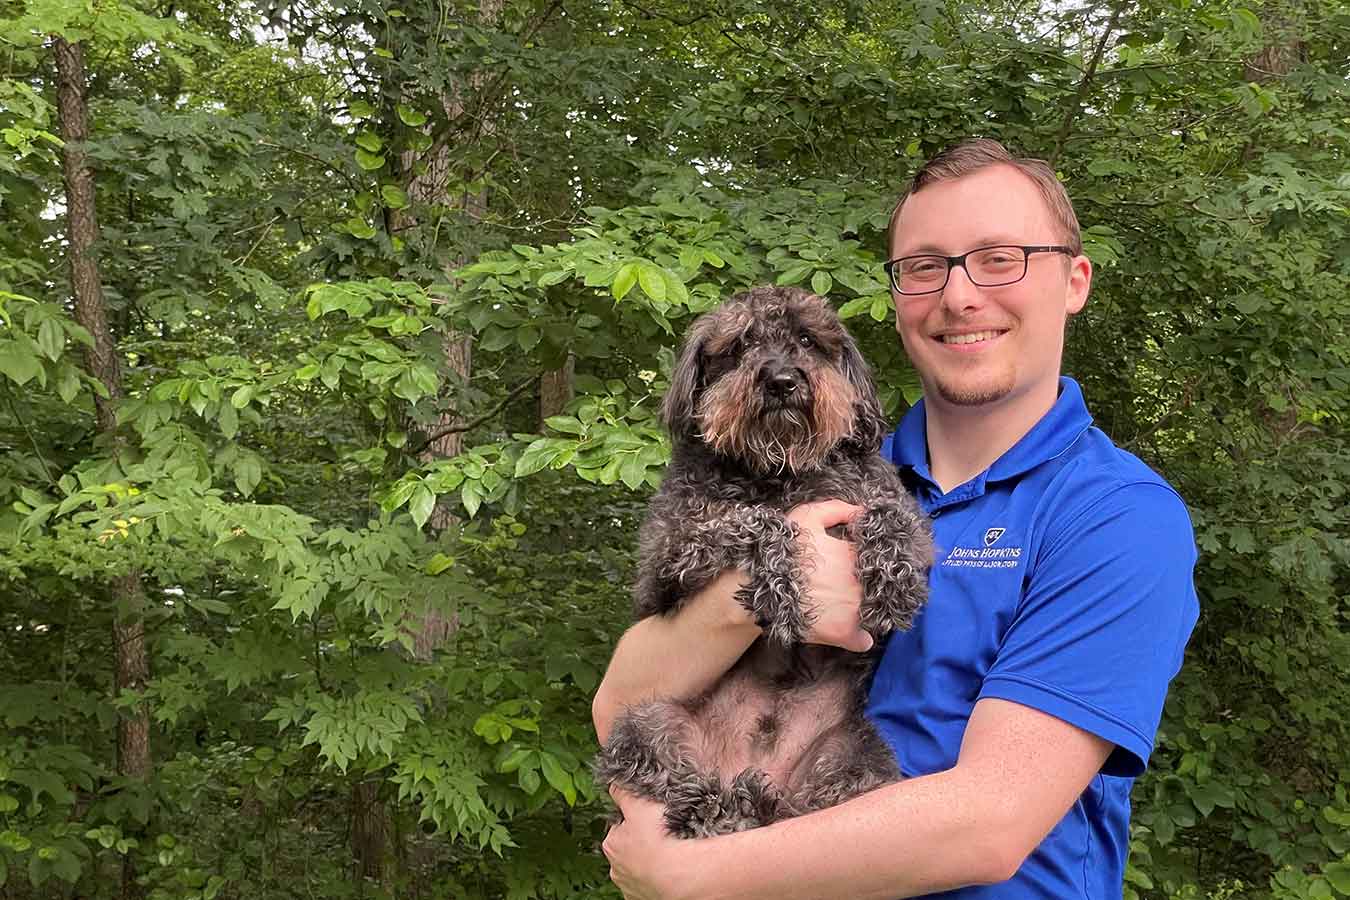 Evan Bolt’s dog, Chip, has been a great companion throughout the pandemic, while Evan has been working on the Johns Hopkins APL COVID-19 dashboard.